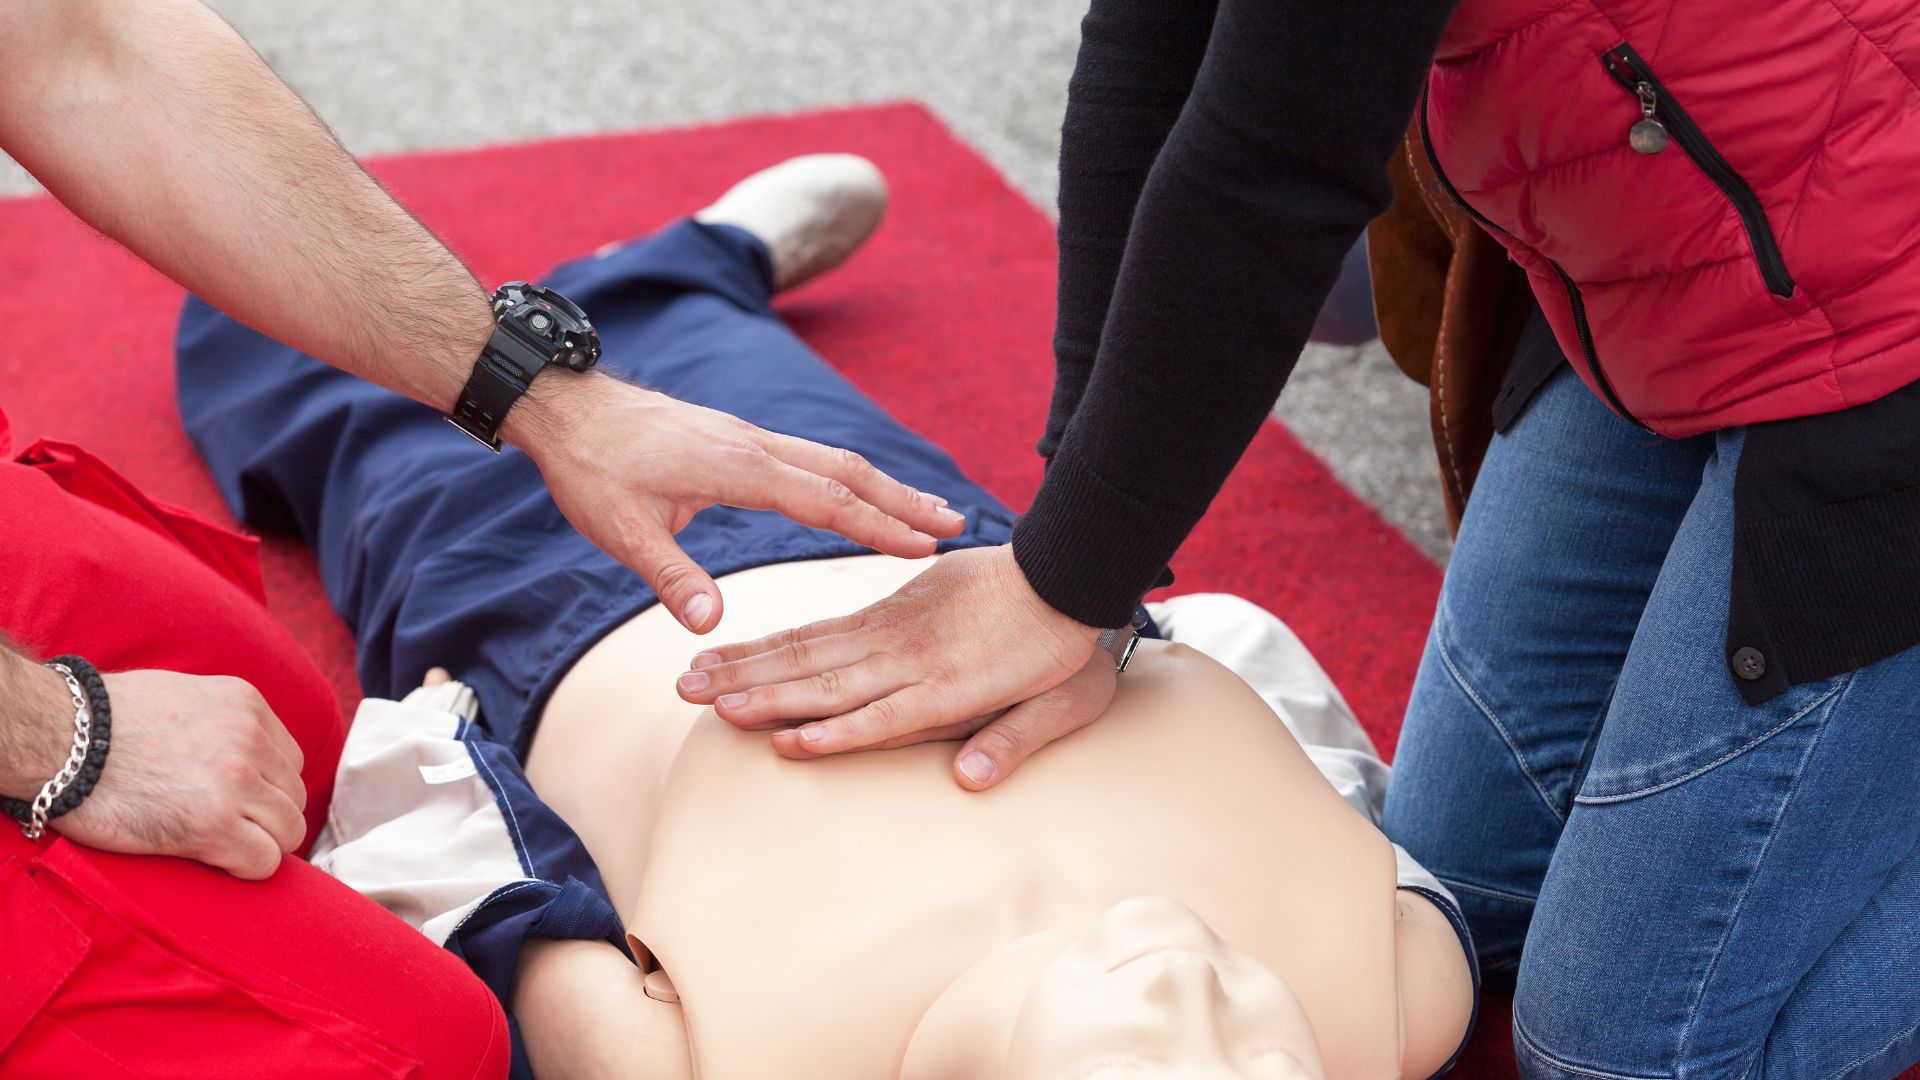 Alexandria Steps Up: Promoting CPR Education and Awareness